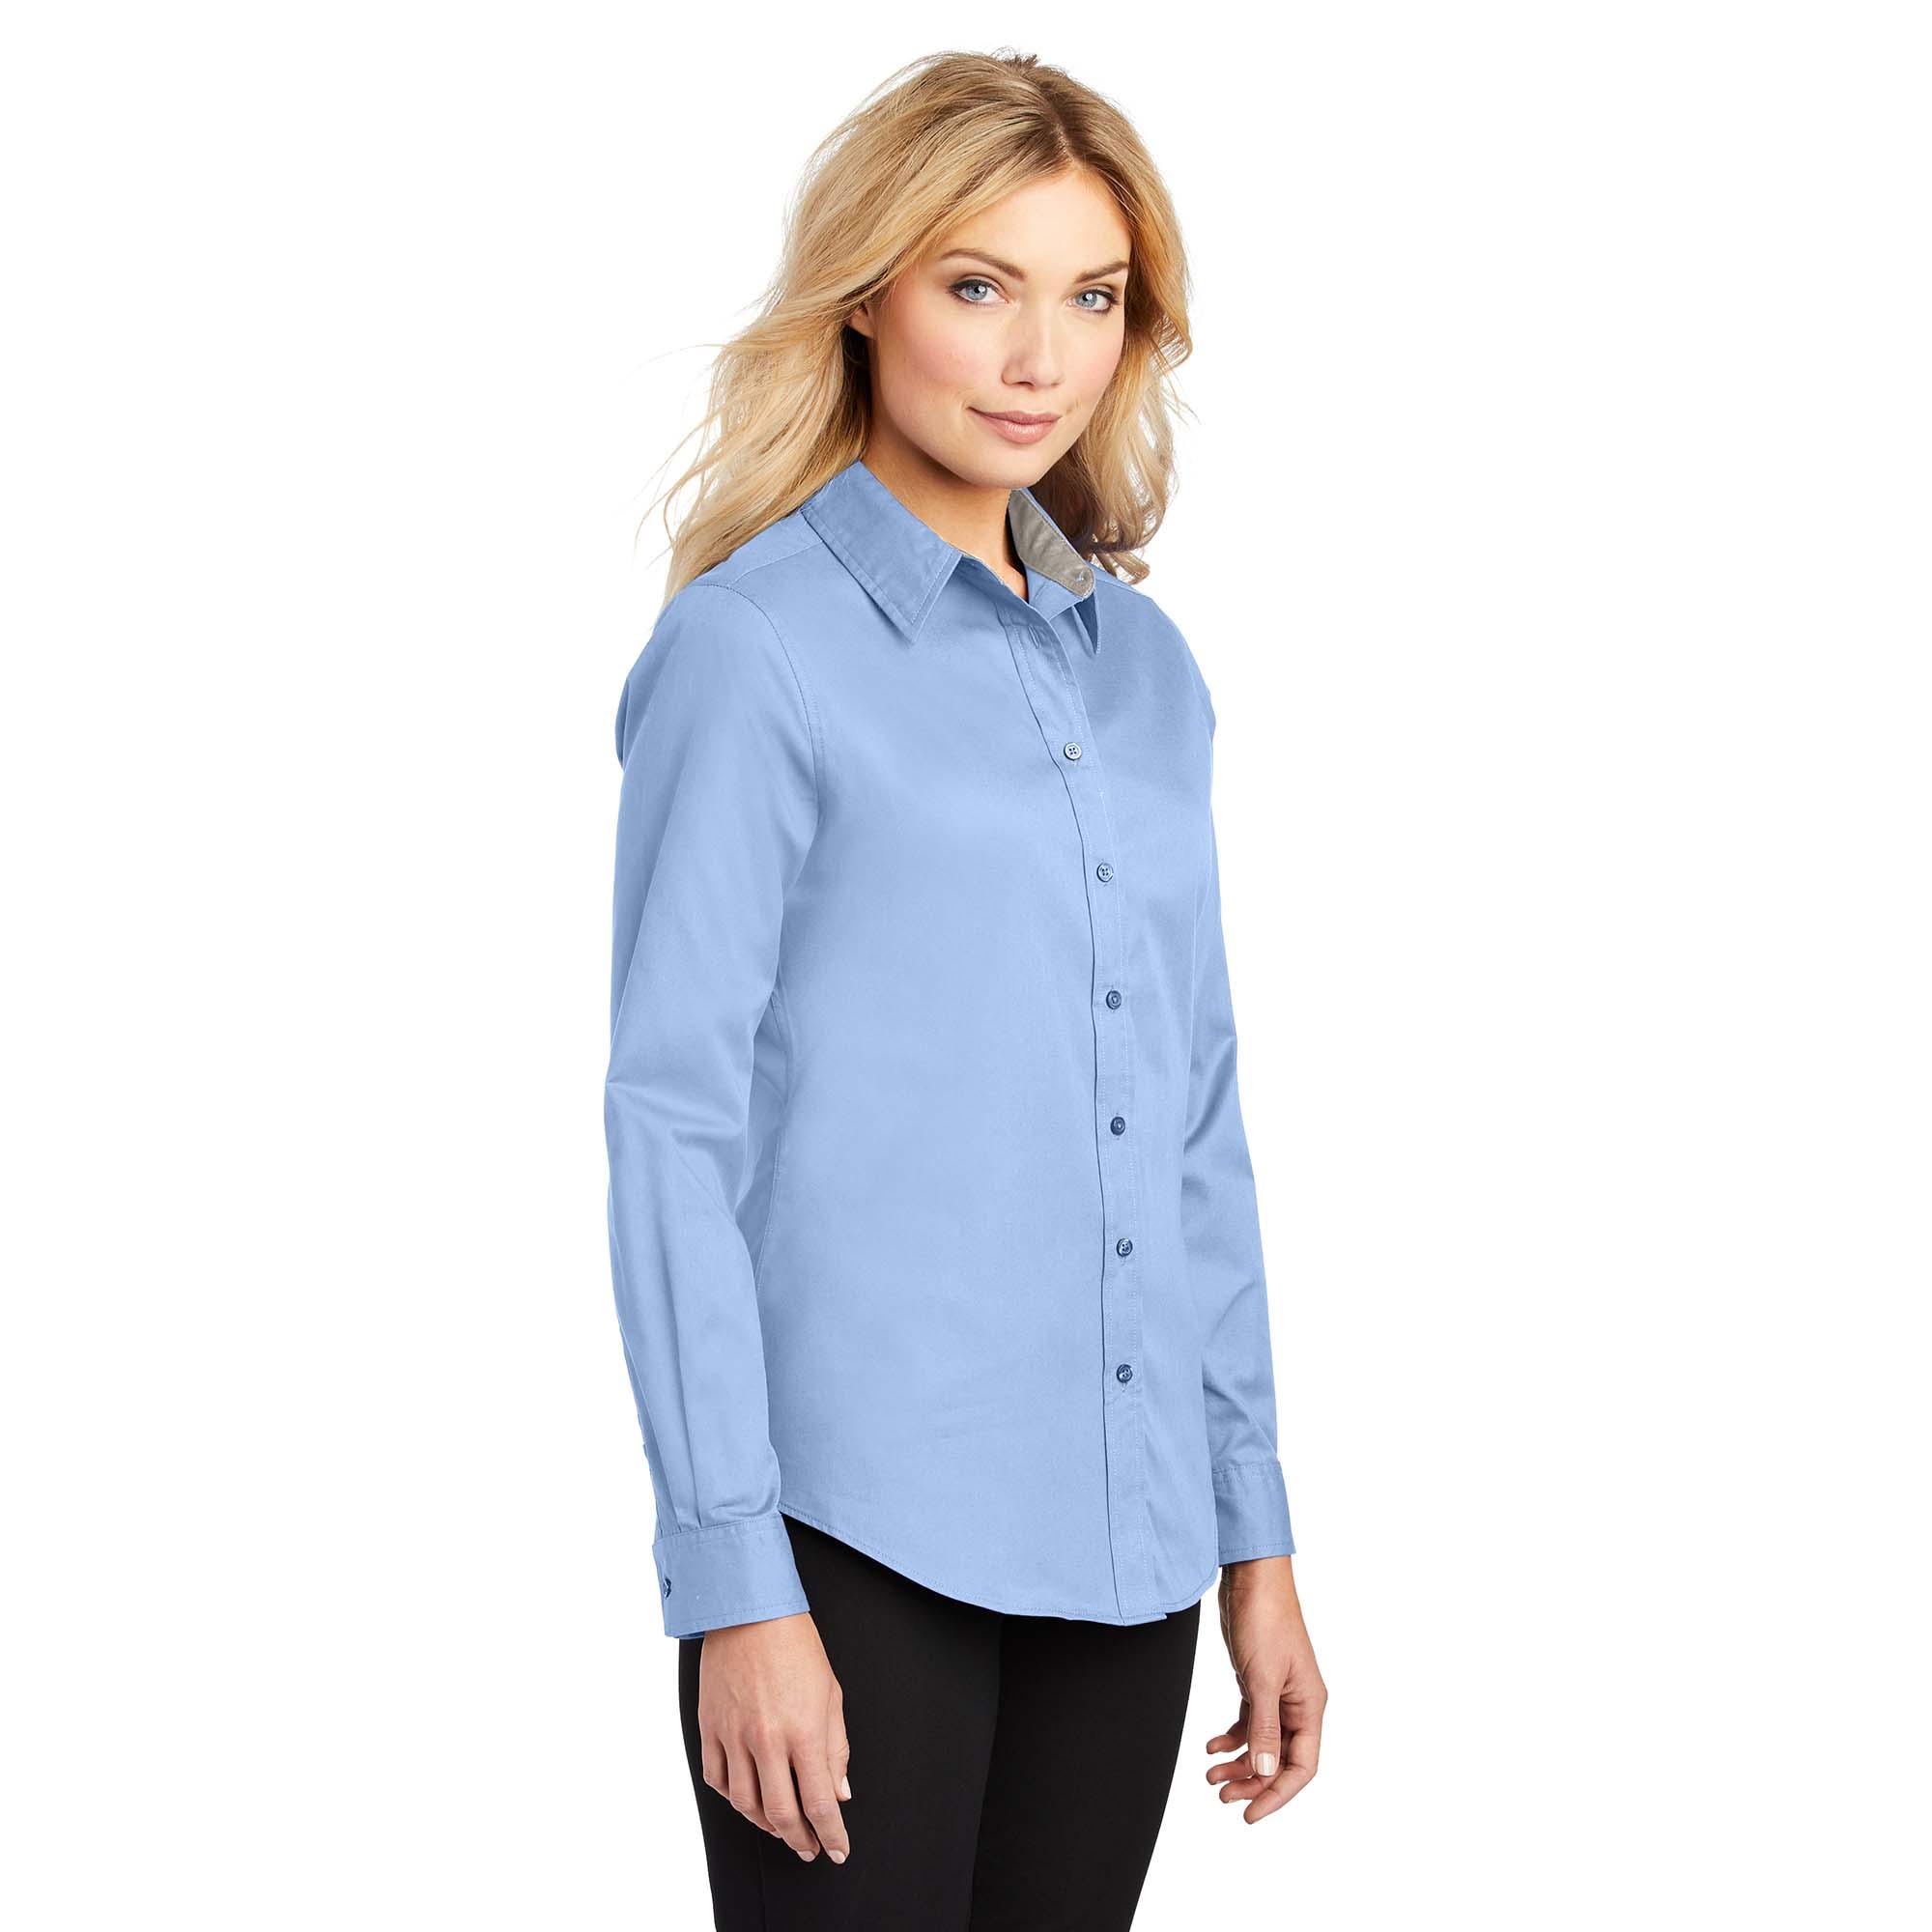 Port Authority L608 Ladies Long Sleeve Easy Care Shirt - Light